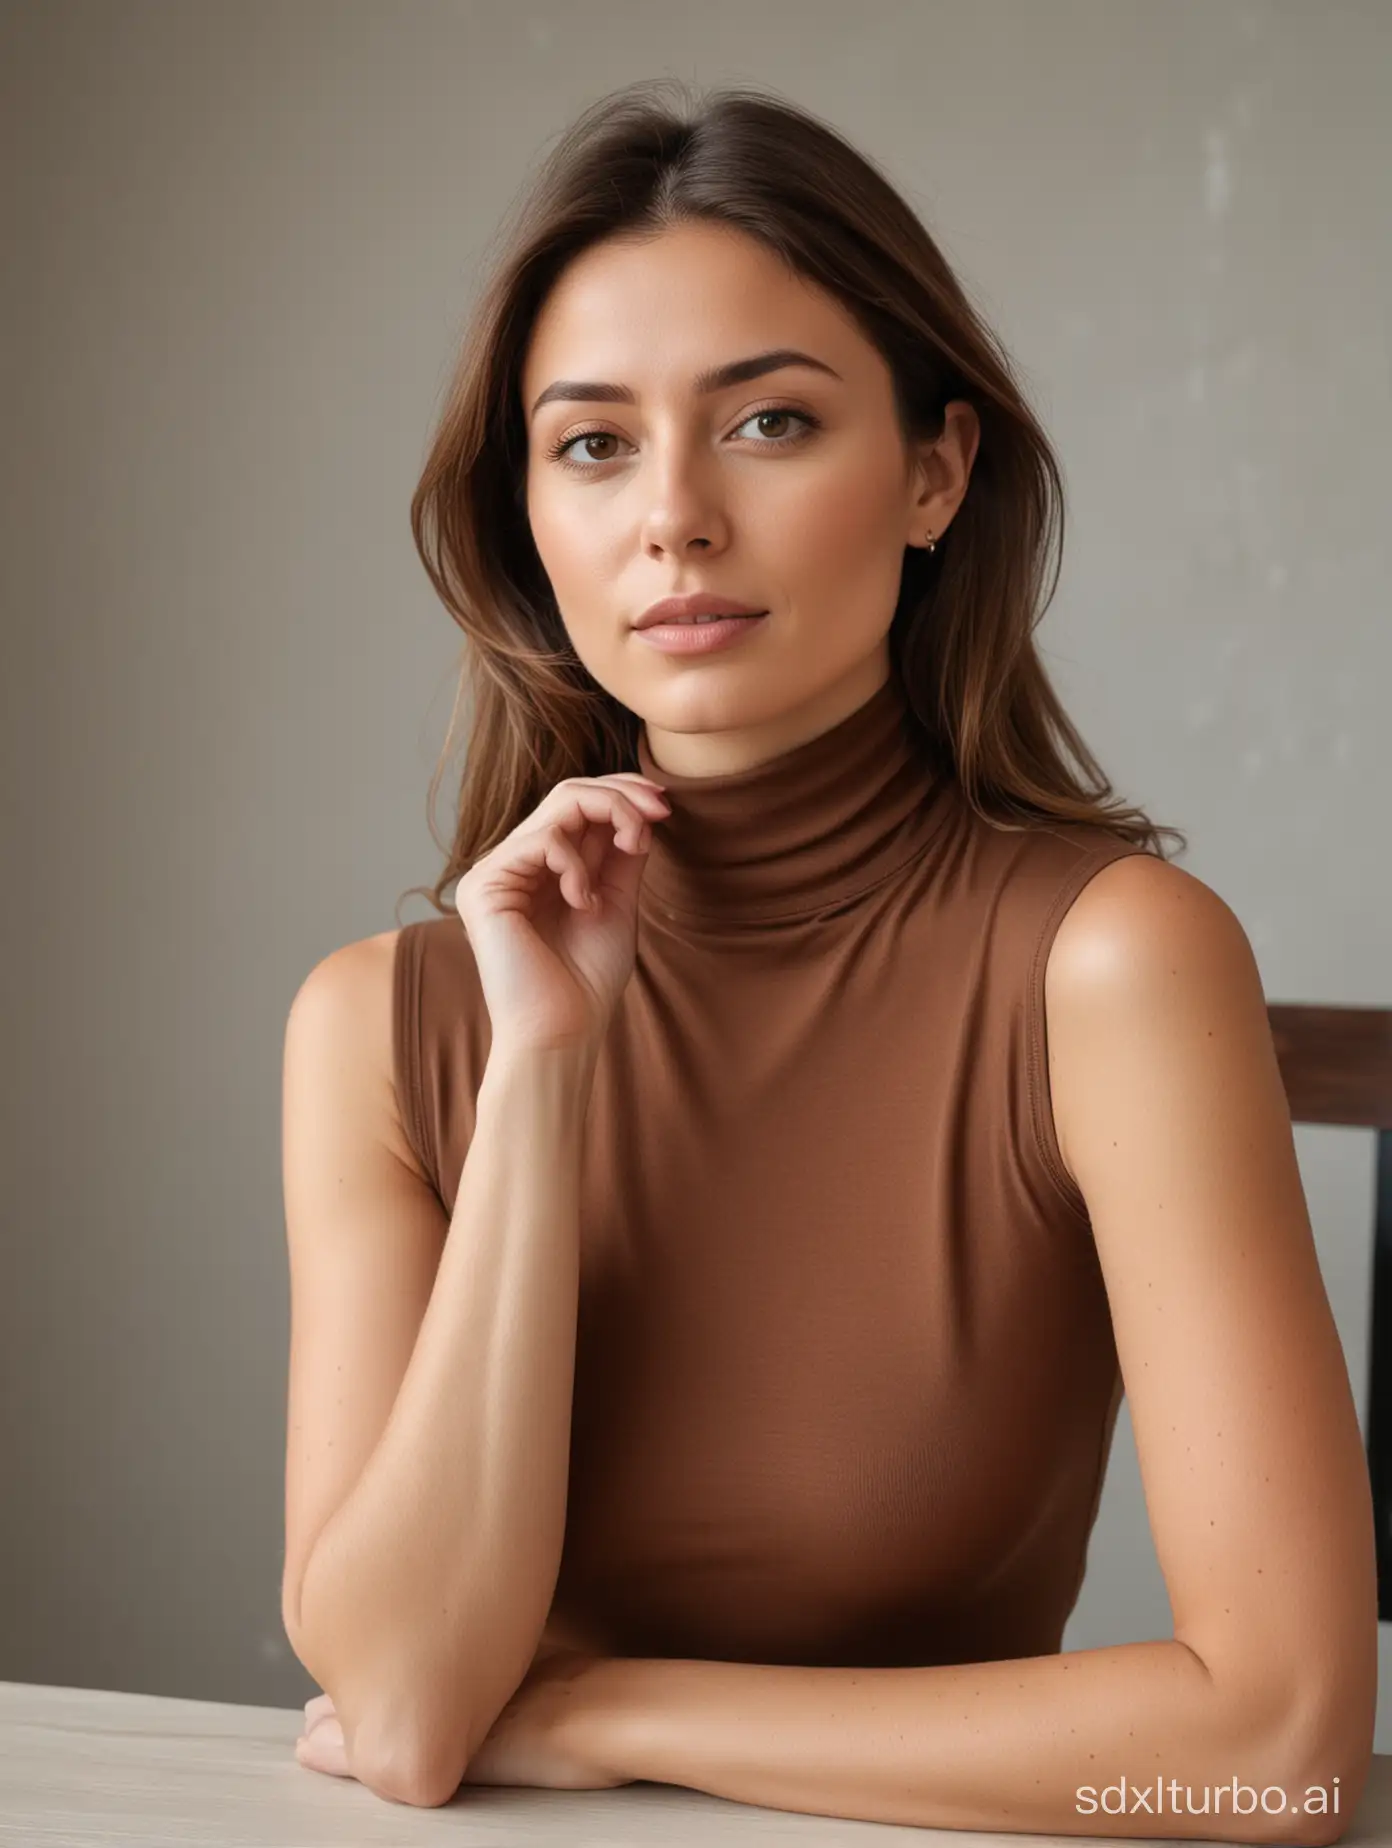 medium brown haired woman, slim, small breast, wearing brown turtleneck sleeveless top, sitting at the table, both hands under chin